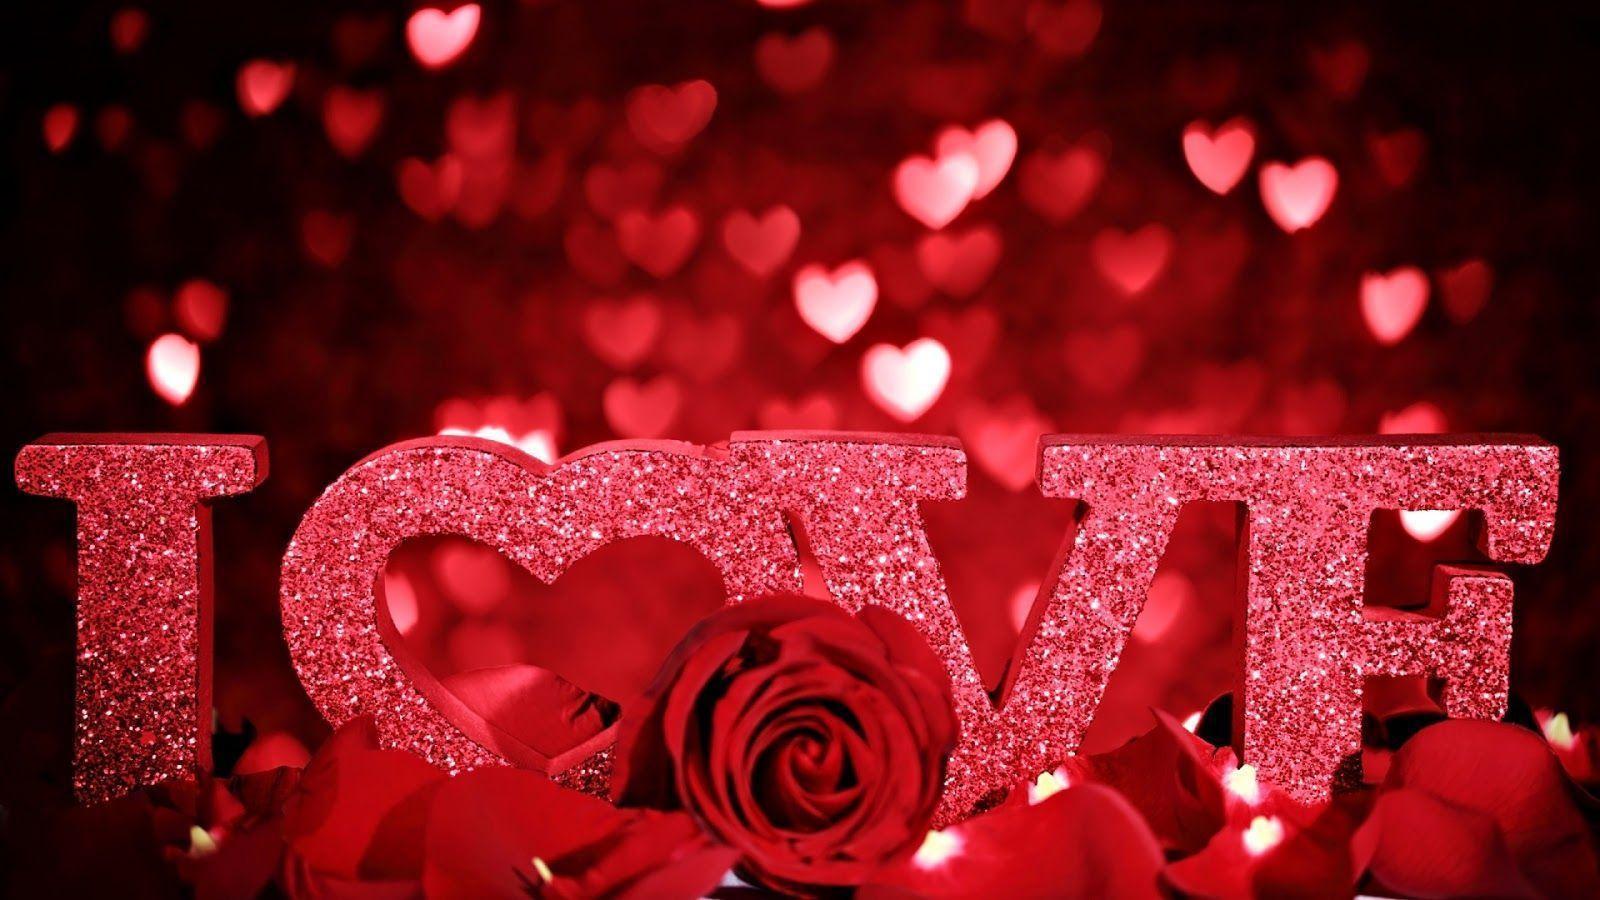 Wallpapers For > Hd Wallpapers Of Love